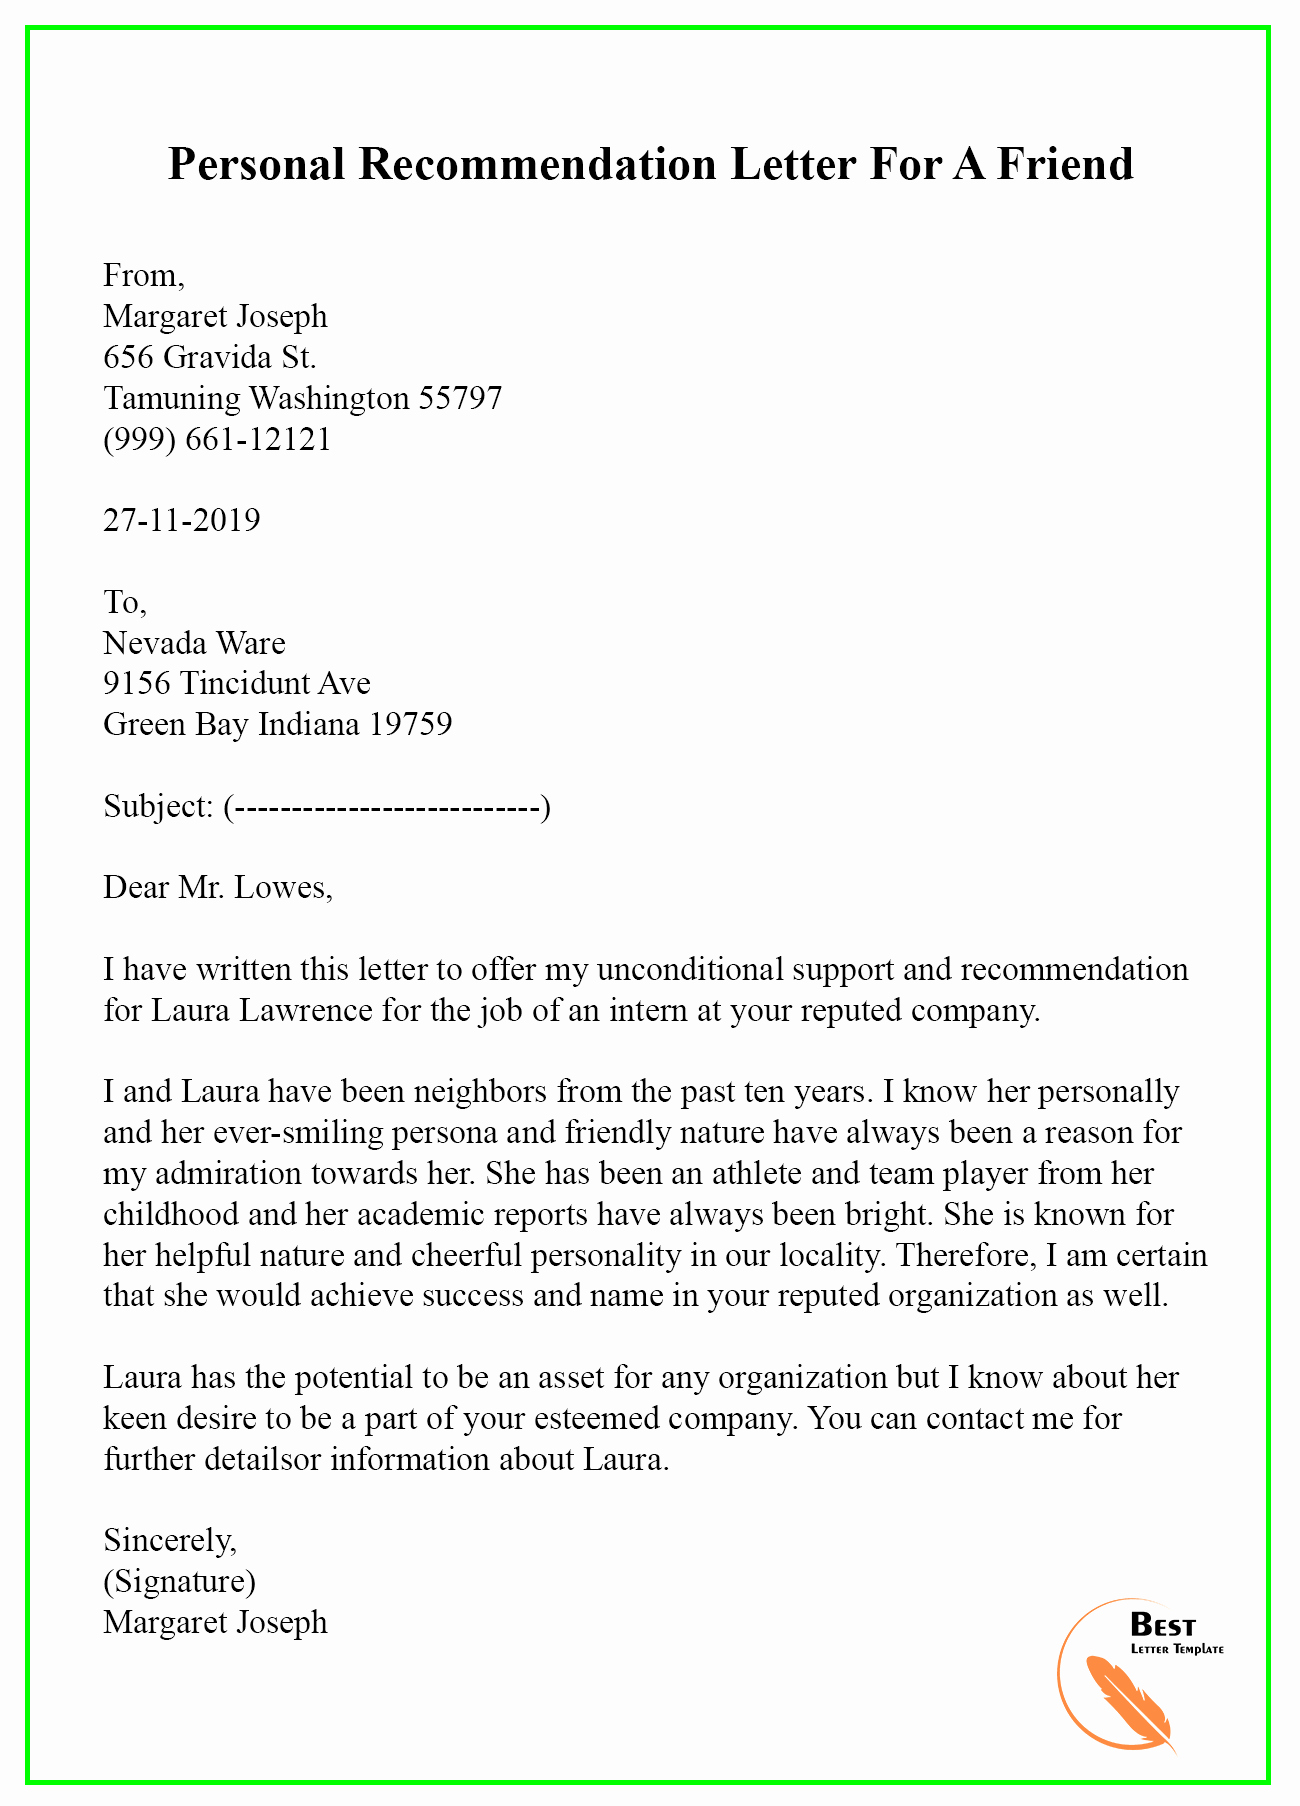 Reference Letter for Friends Luxury Re Mendation Letter for A Friend – format Sample &amp; Example